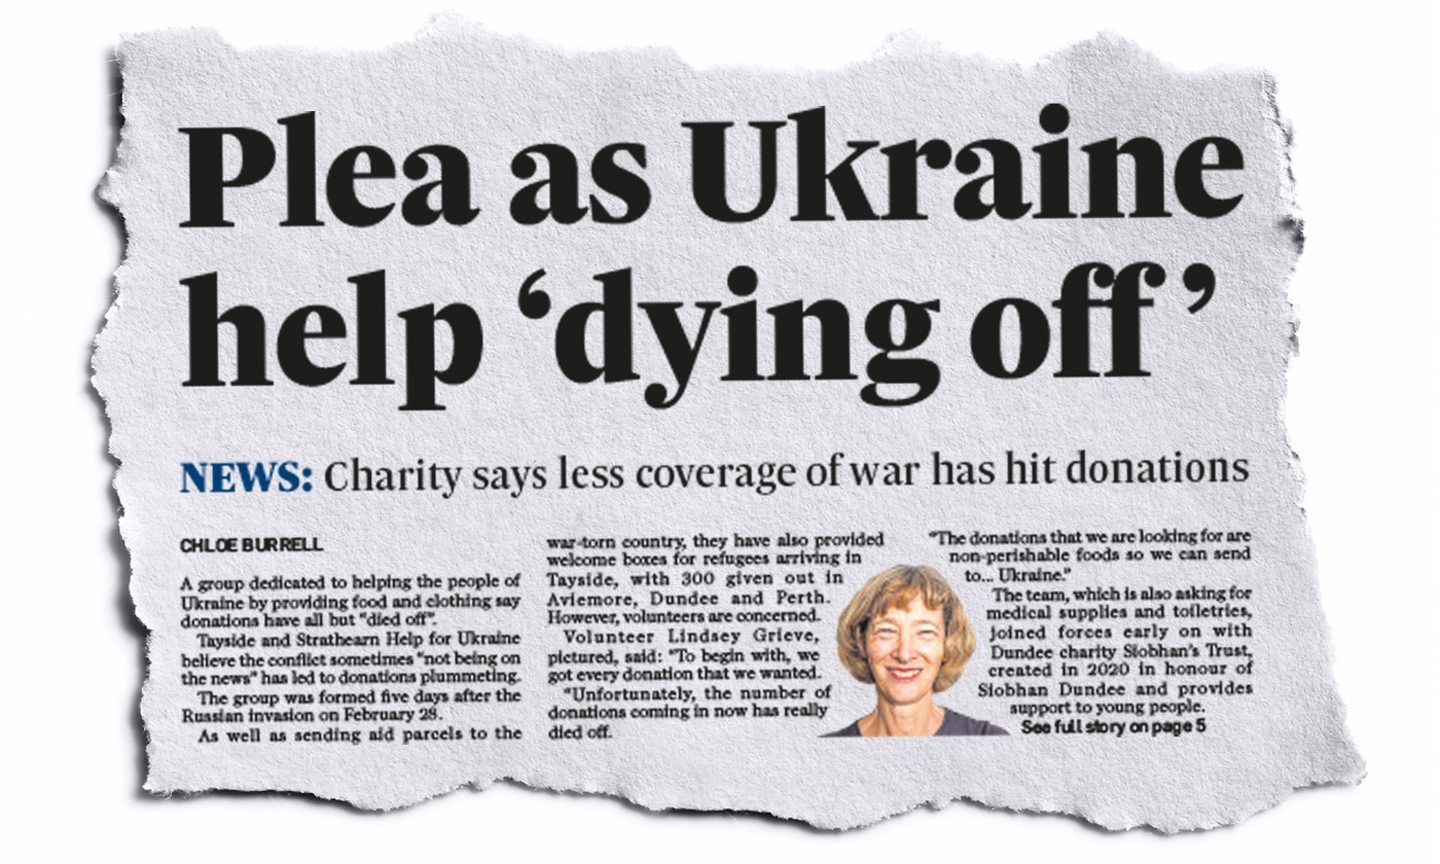 An excerpt from the front page of The Courier when Lindsey made an appeal for more goods to be donated for Ukraine.